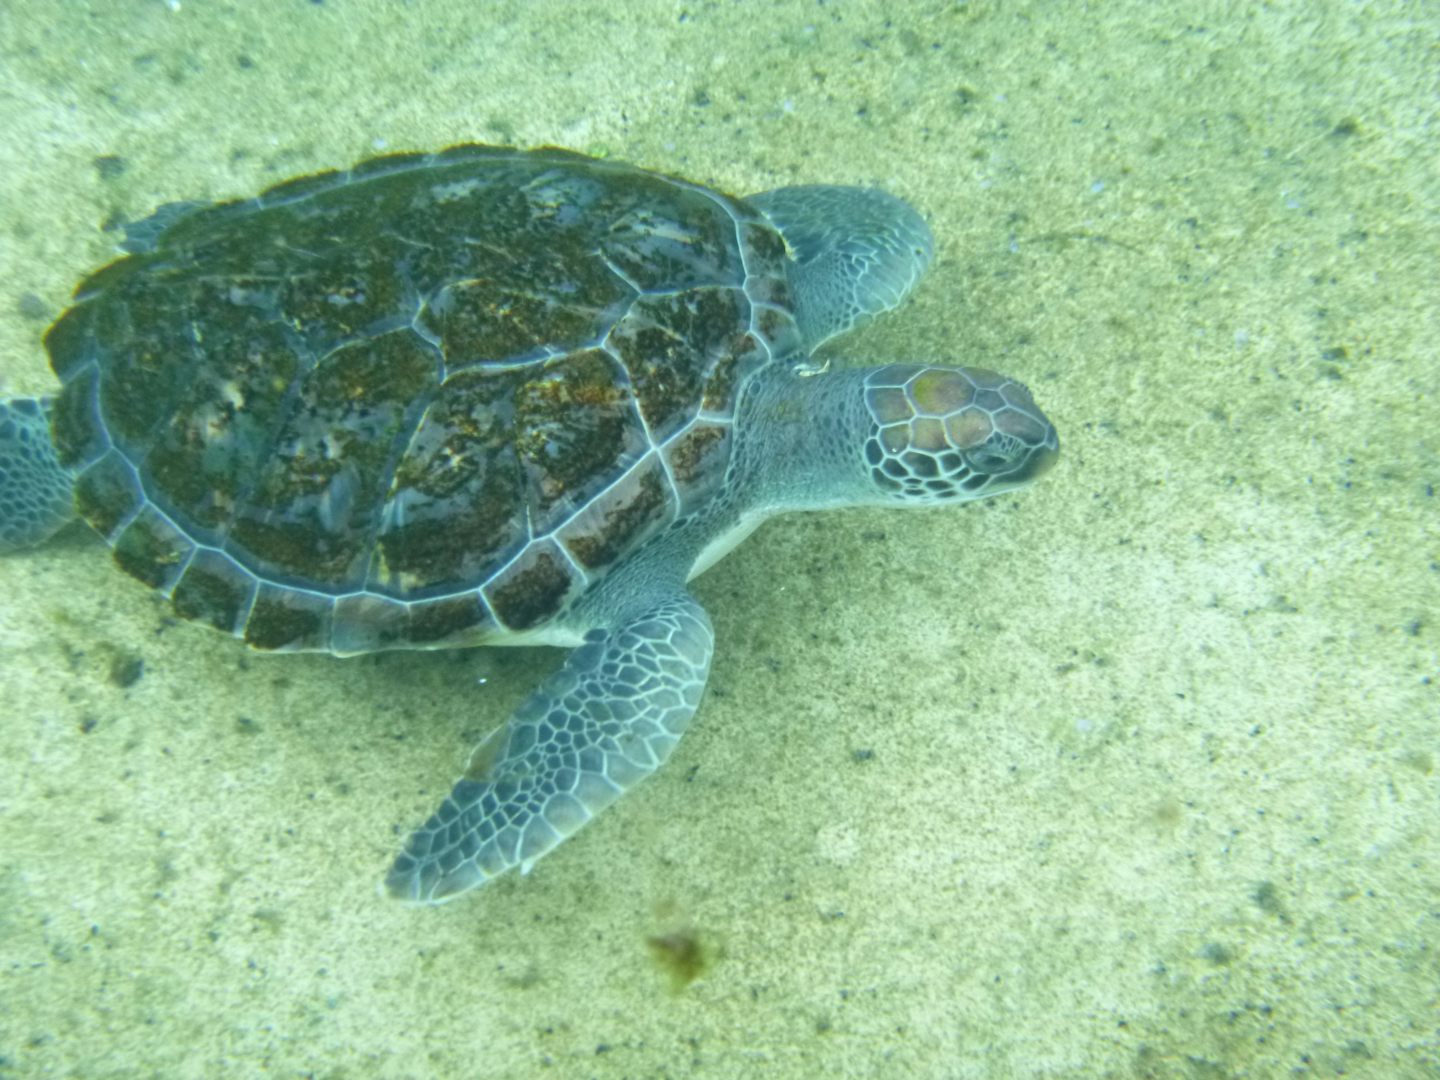 Swimming with the turtles on Grand Cayman